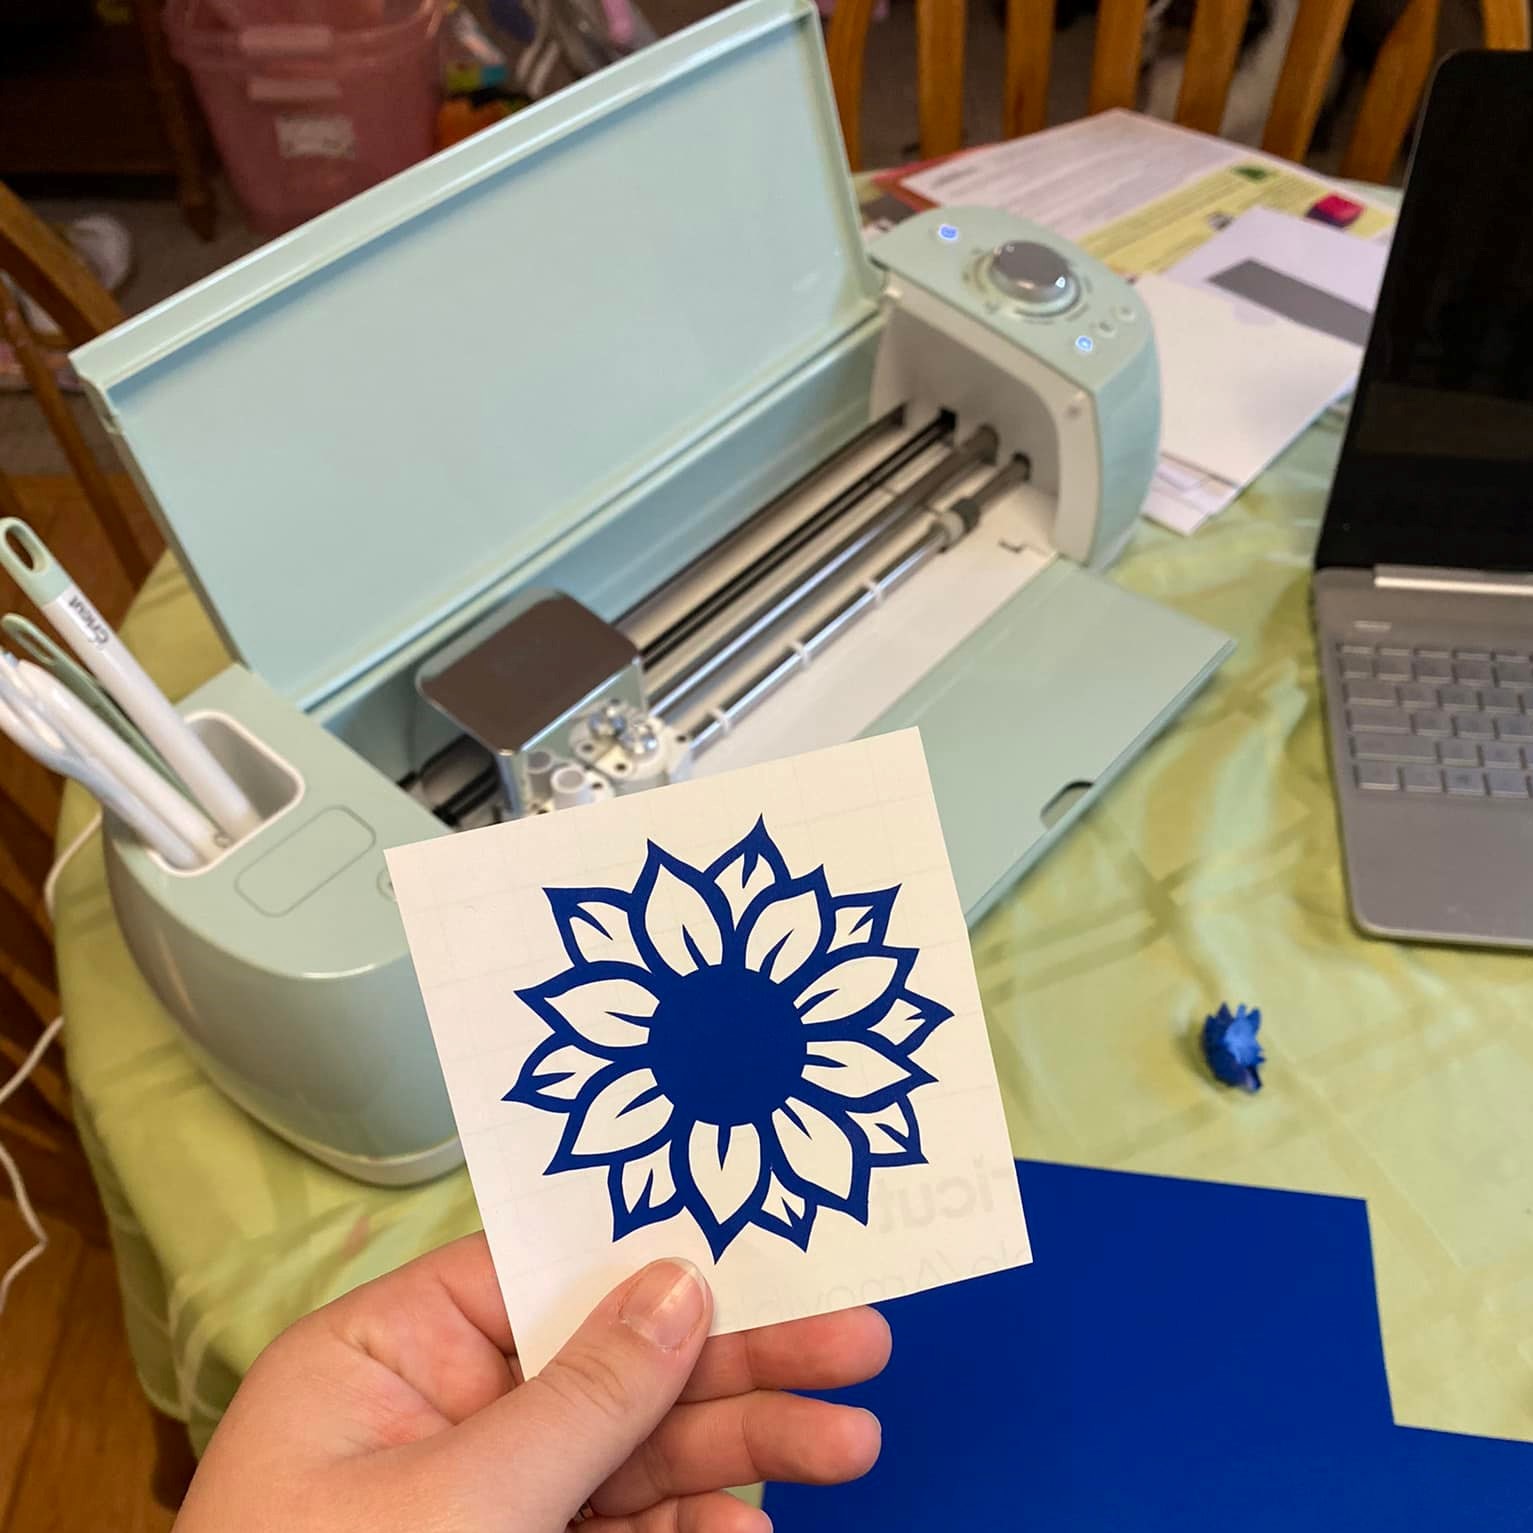 Cricut Review Must Read This Before Buying